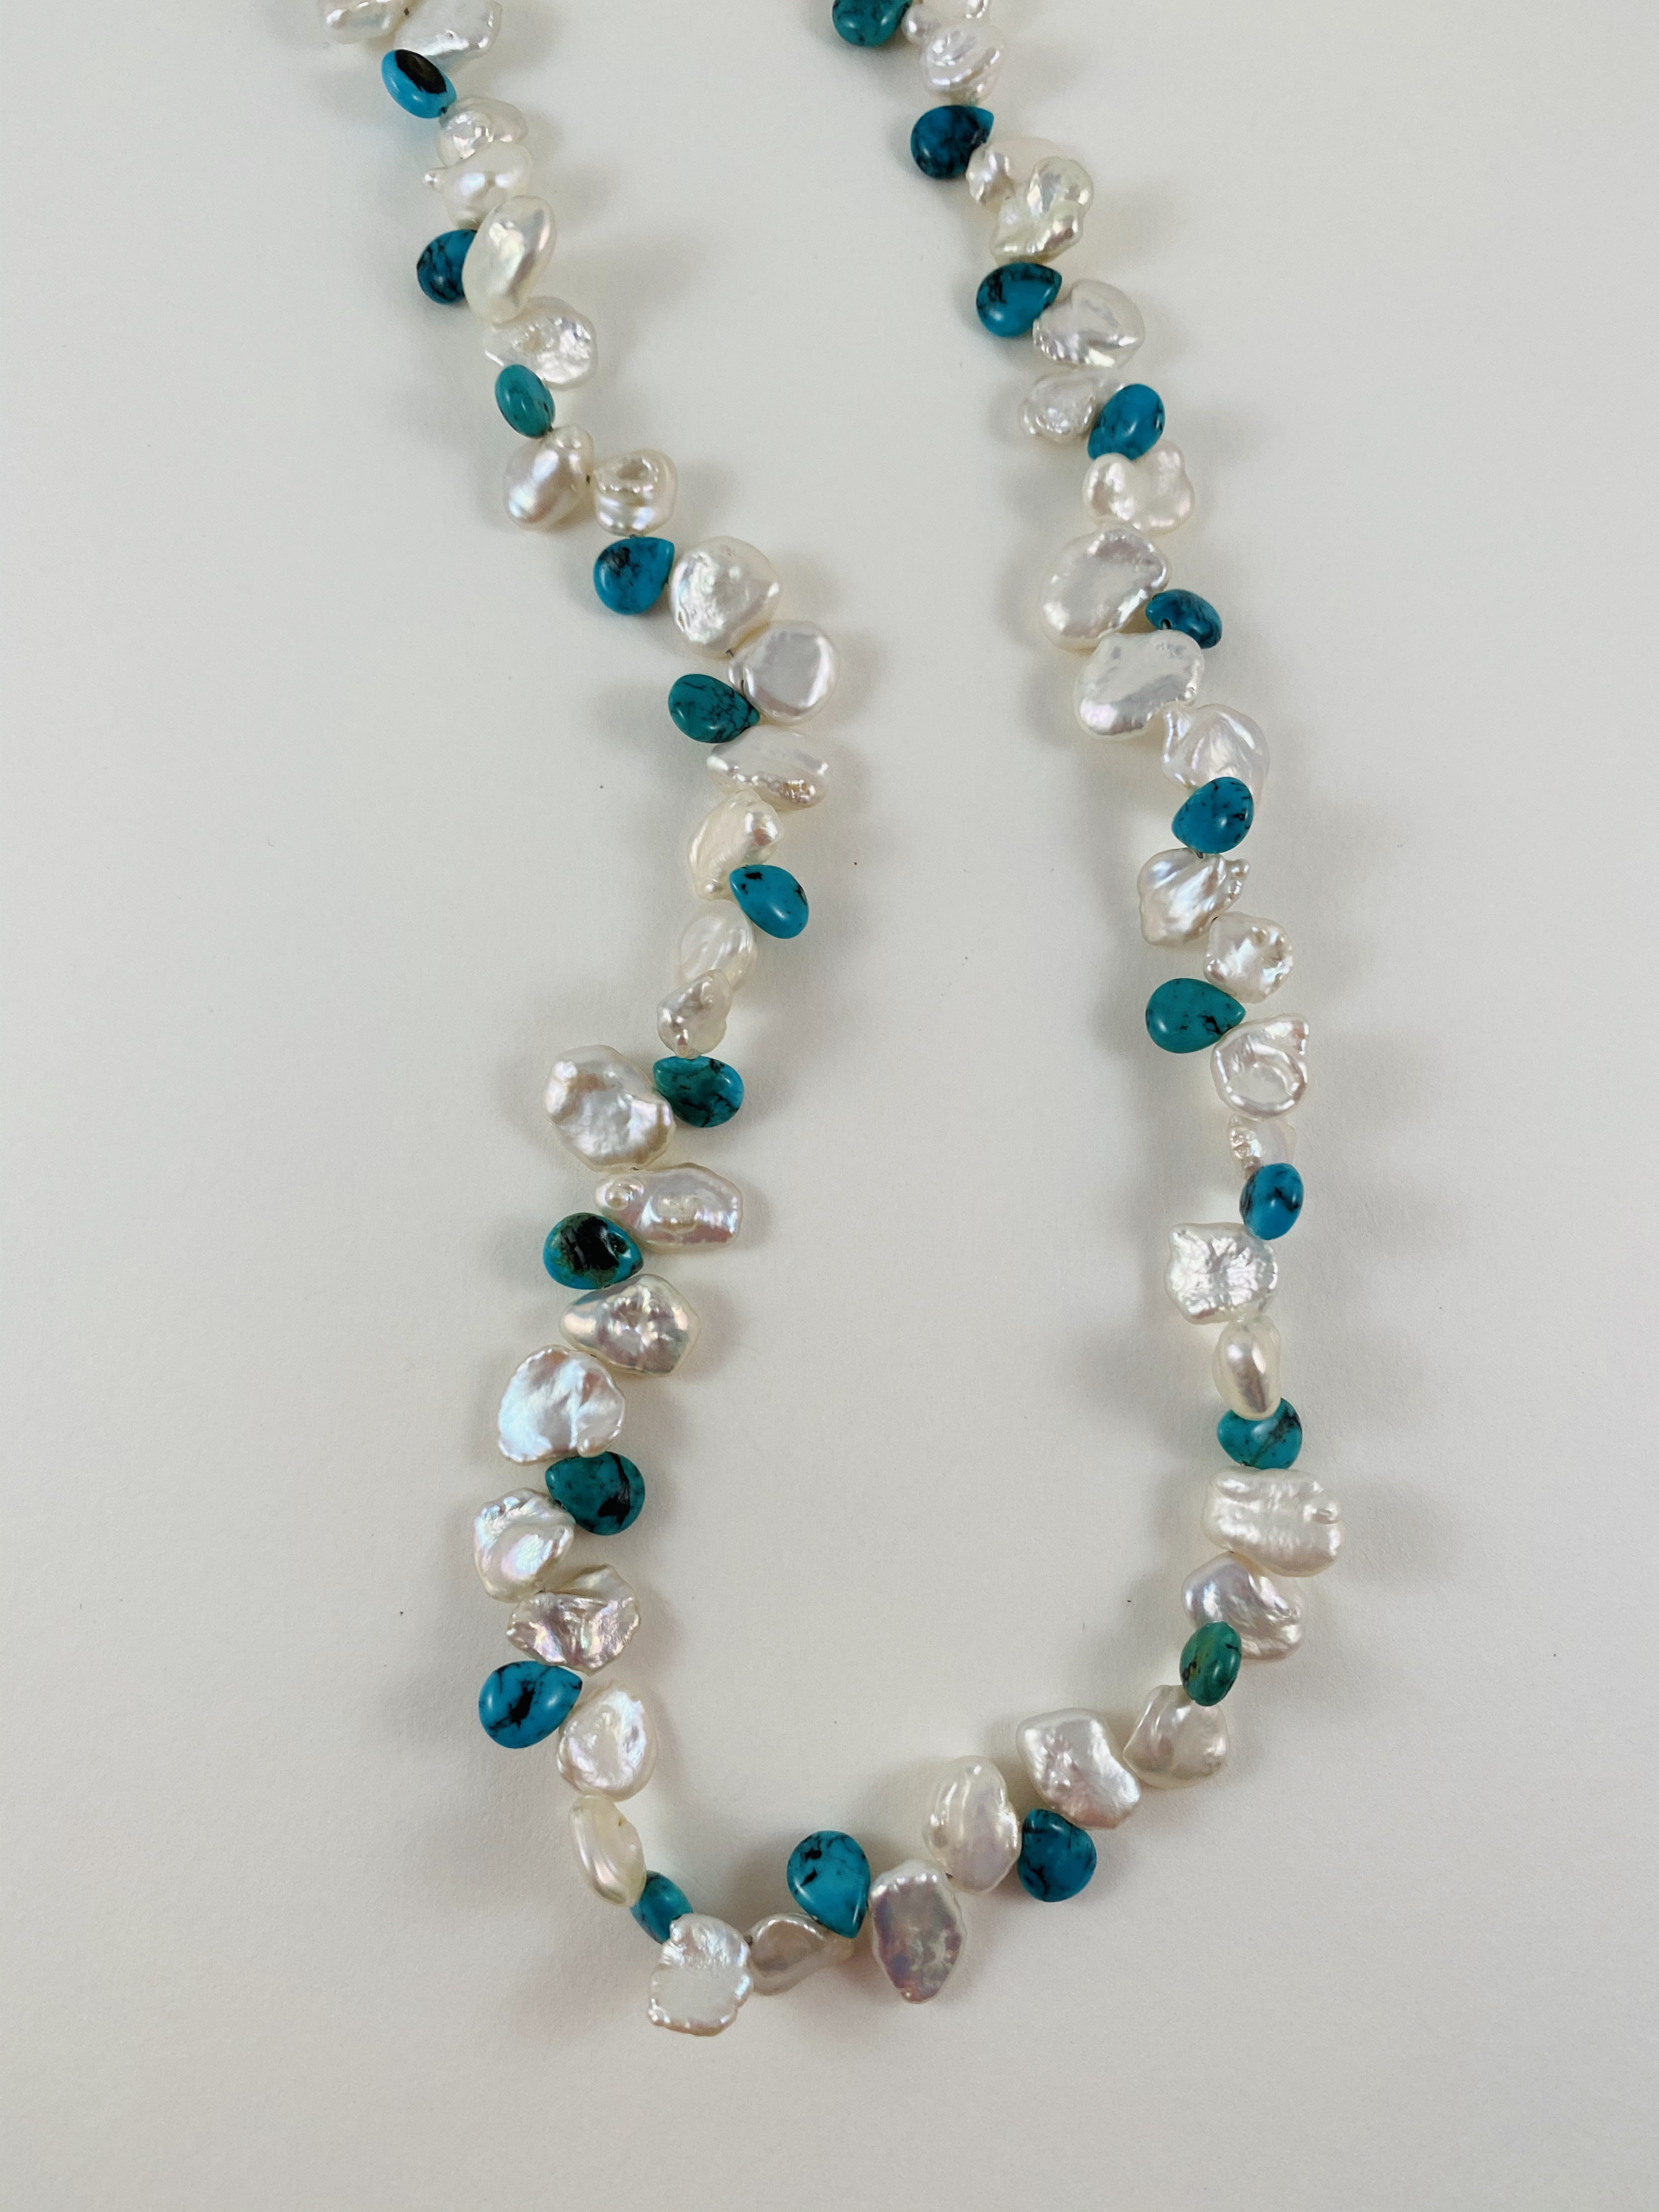 Keshi Pearl and Turquoise Brio Necklace NT20-8 by Nance Trueworthy